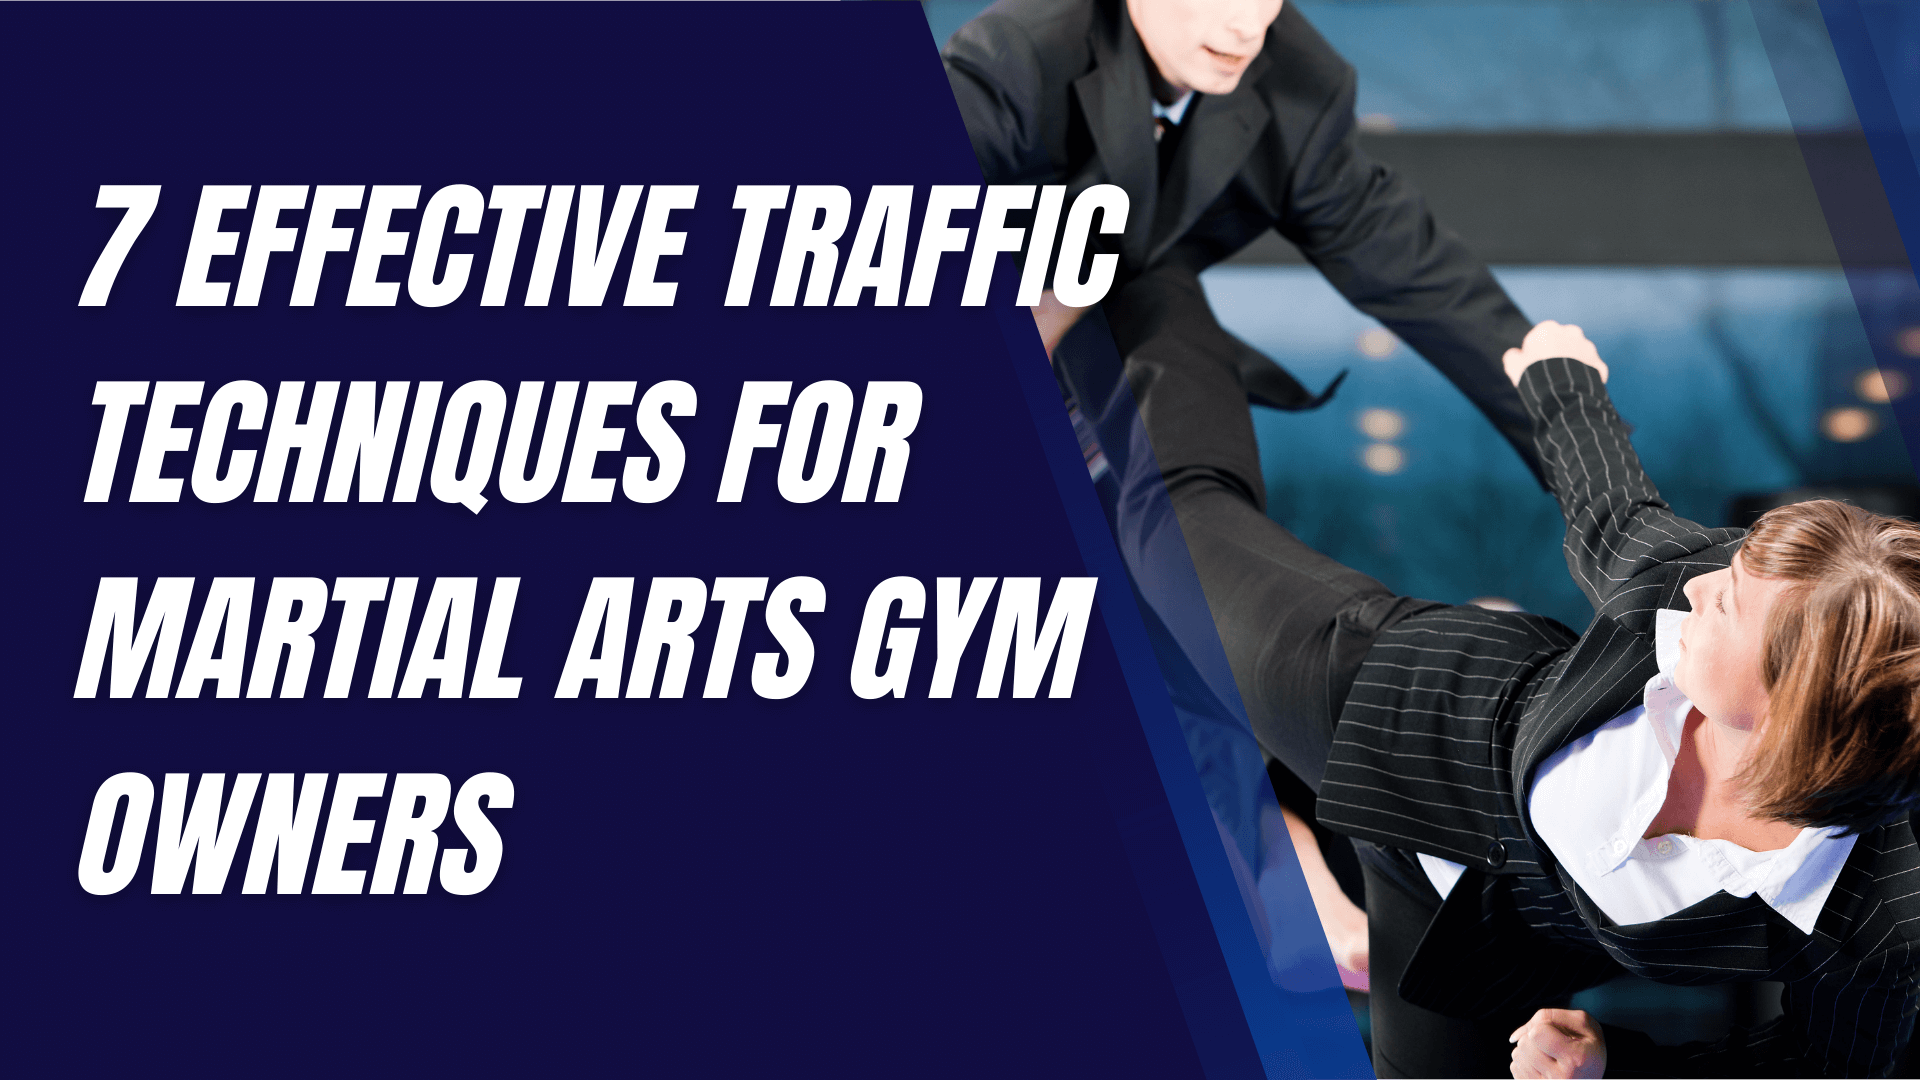 7 Effective Traffic Techniques for Martial Arts Gym Owners